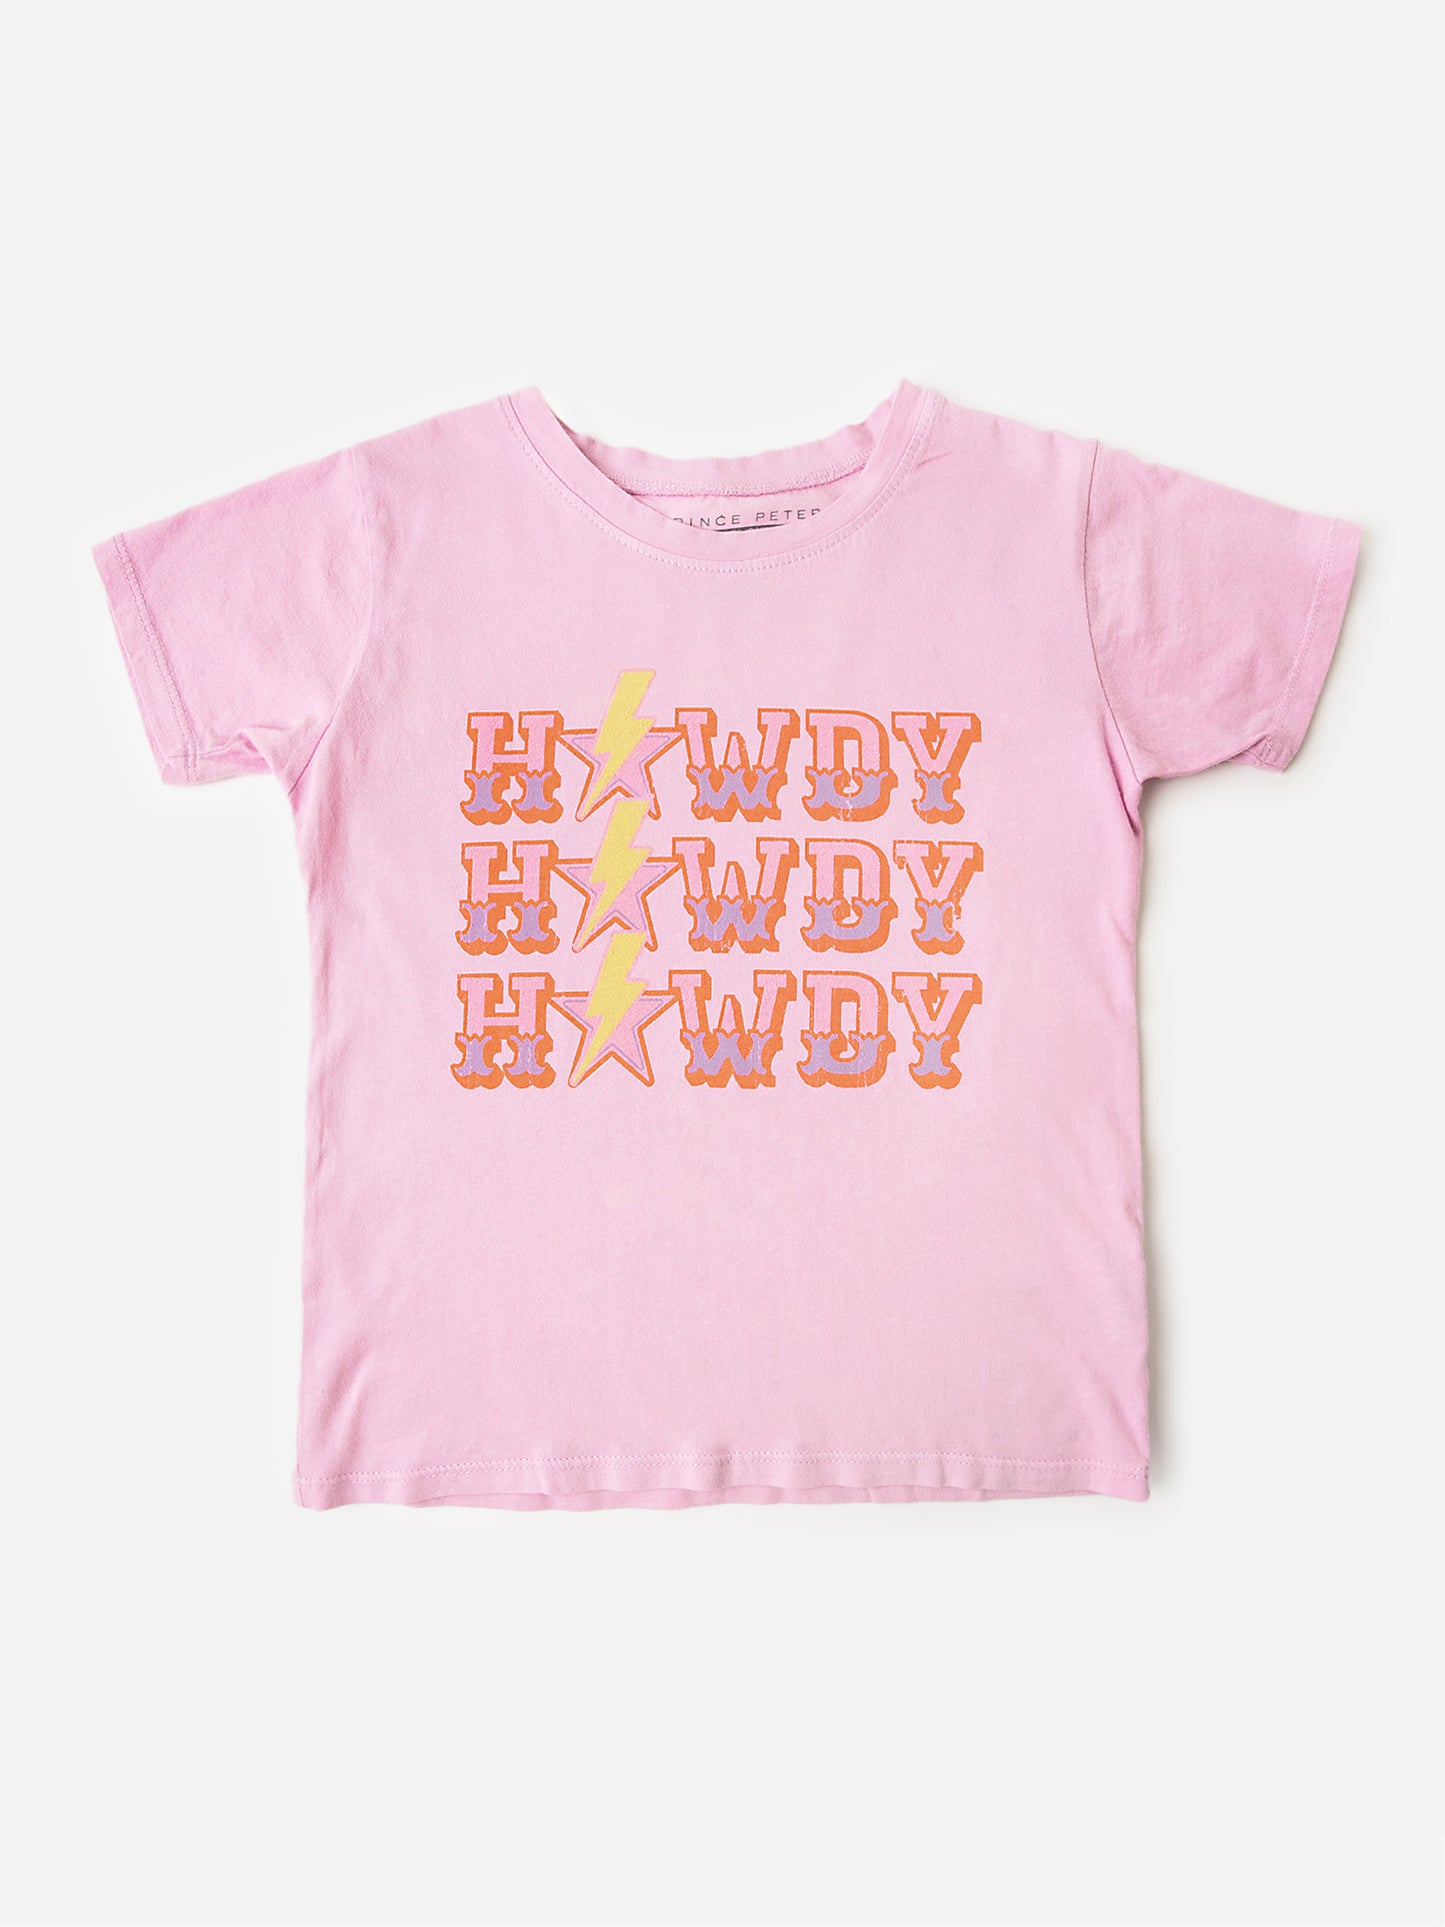 Prince Peter Collection Girls' Howdy Tee